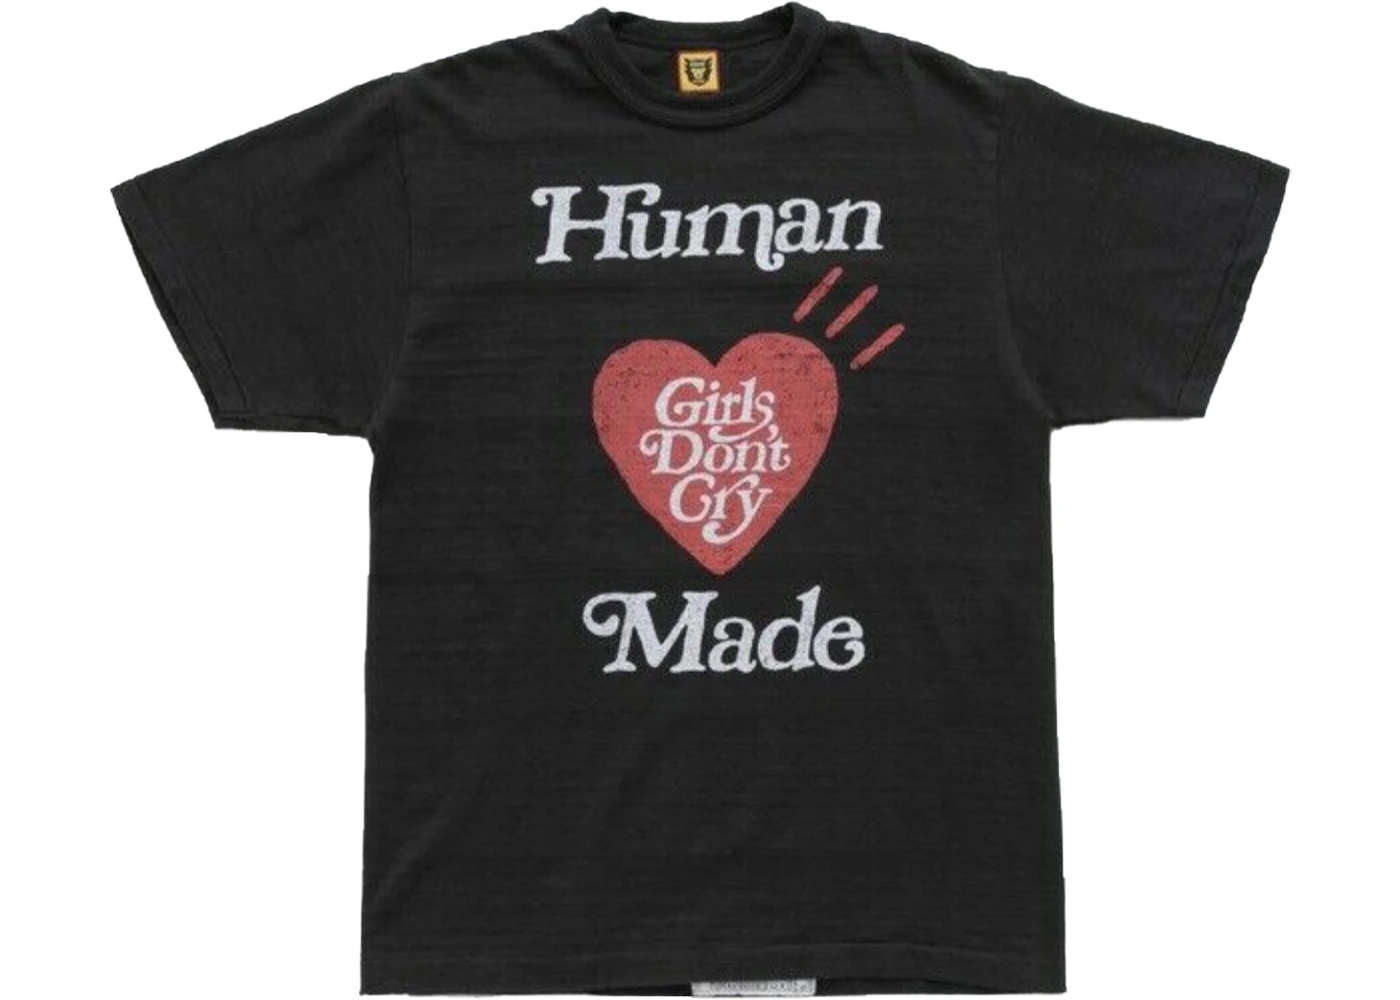 Human Made x Girls Don't Cry Tee 1 Black - SS19 Men's - US